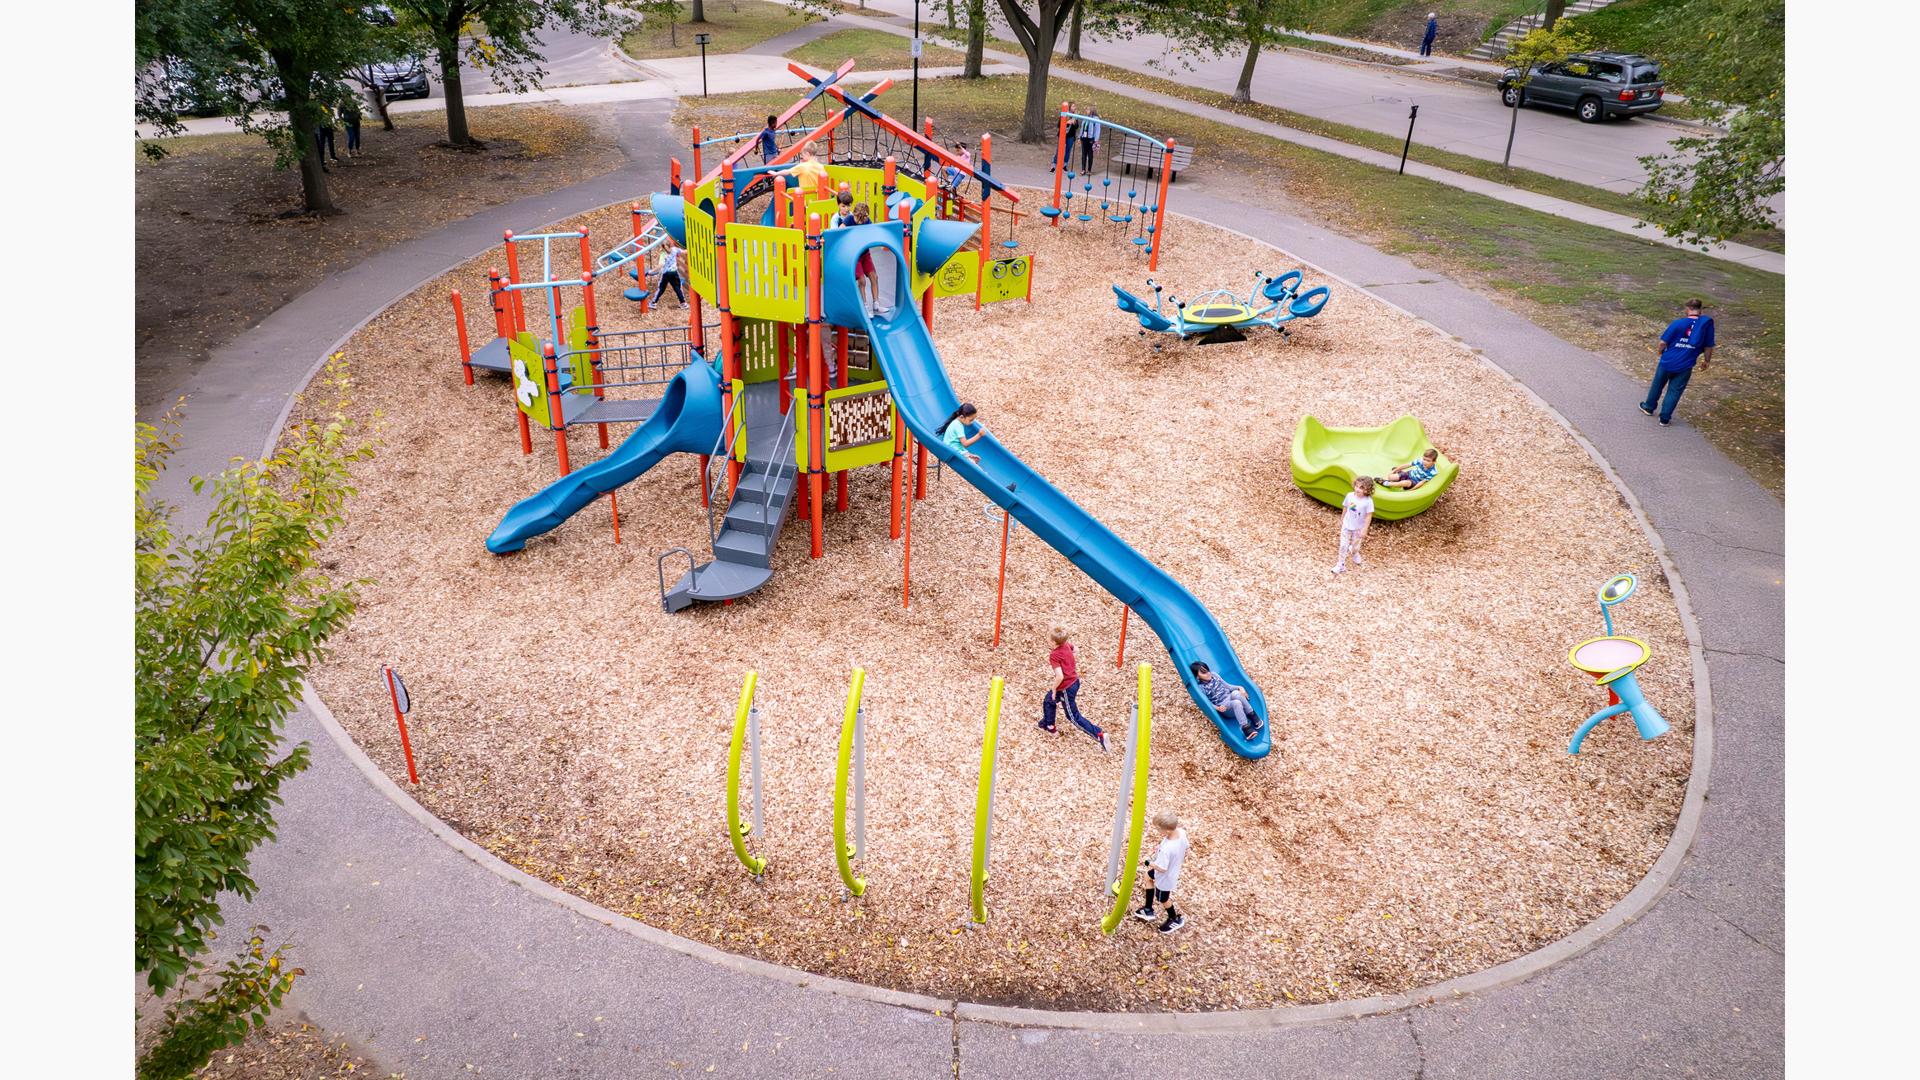 Elevated view of a circular play area with bright orange, green, and blue play activities on multiple structures with a multi person see-saw and spinner.